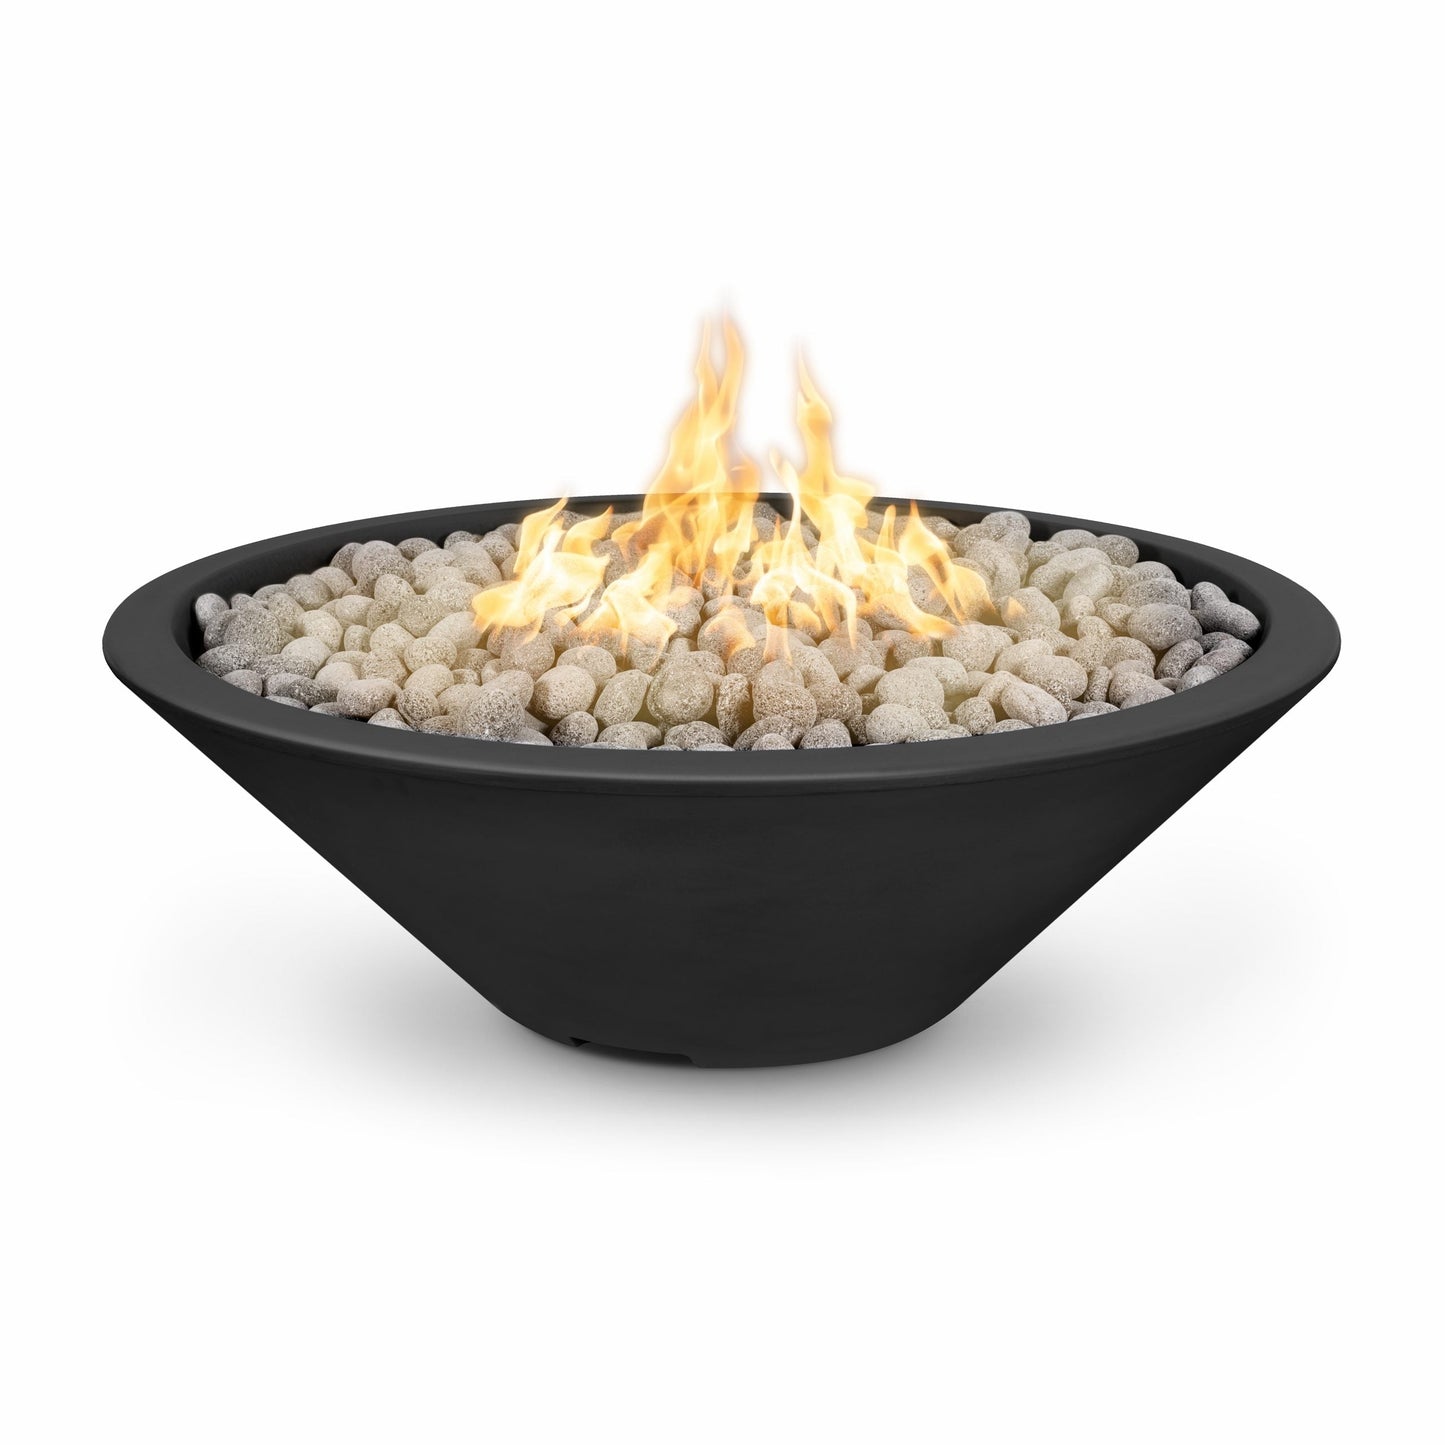 The Outdoor Plus Round Cazo 48" Copper Vein Powder Coated Metal Liquid Propane Fire Pit with 12V Electronic Ignition